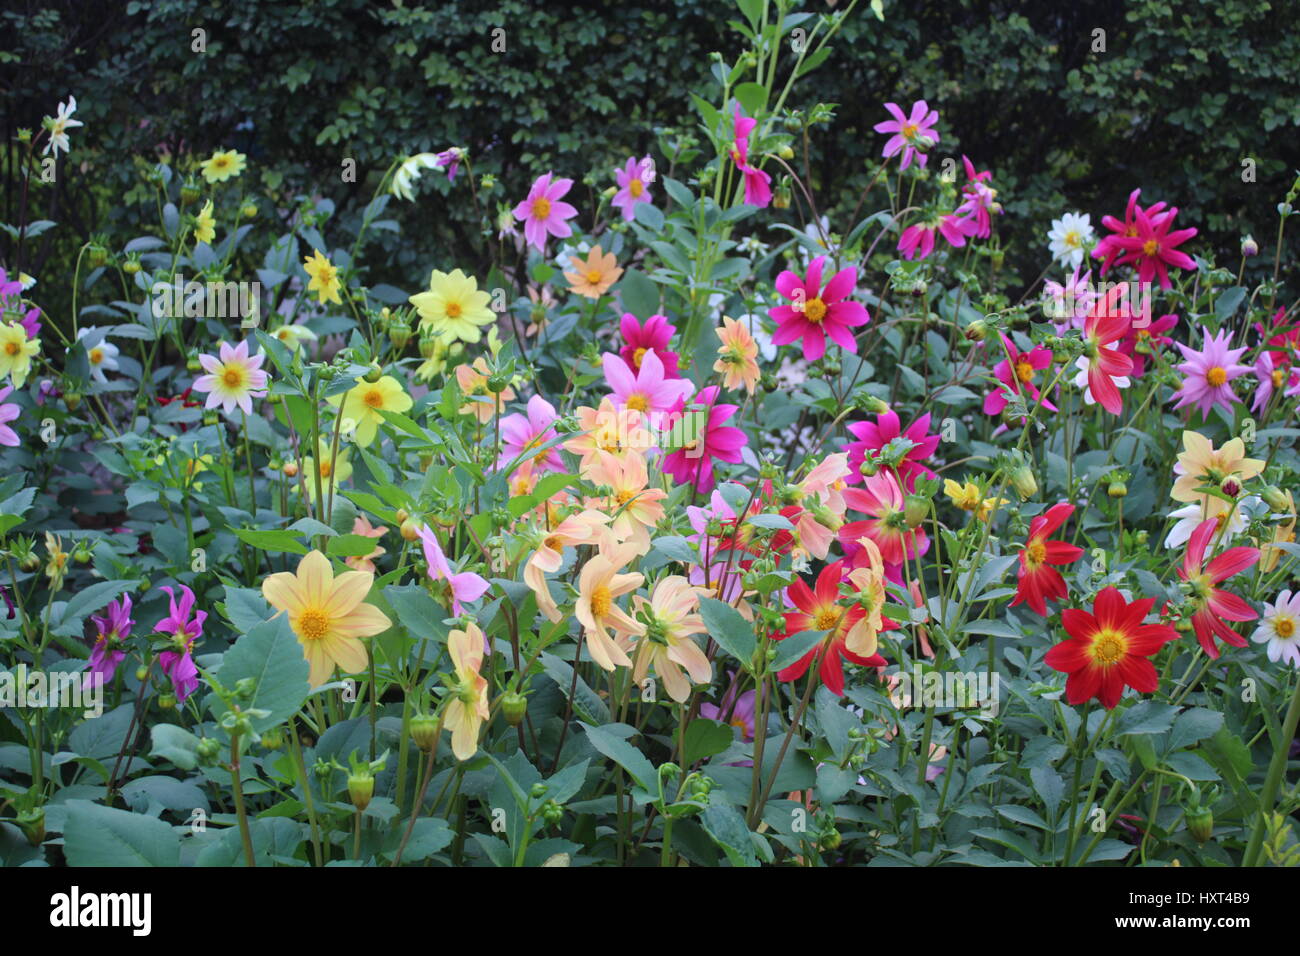 Beautiful flowers in the garden spreading freshness.It Is The Picture taken in a garden situated at New Delhi,India Stock Photo